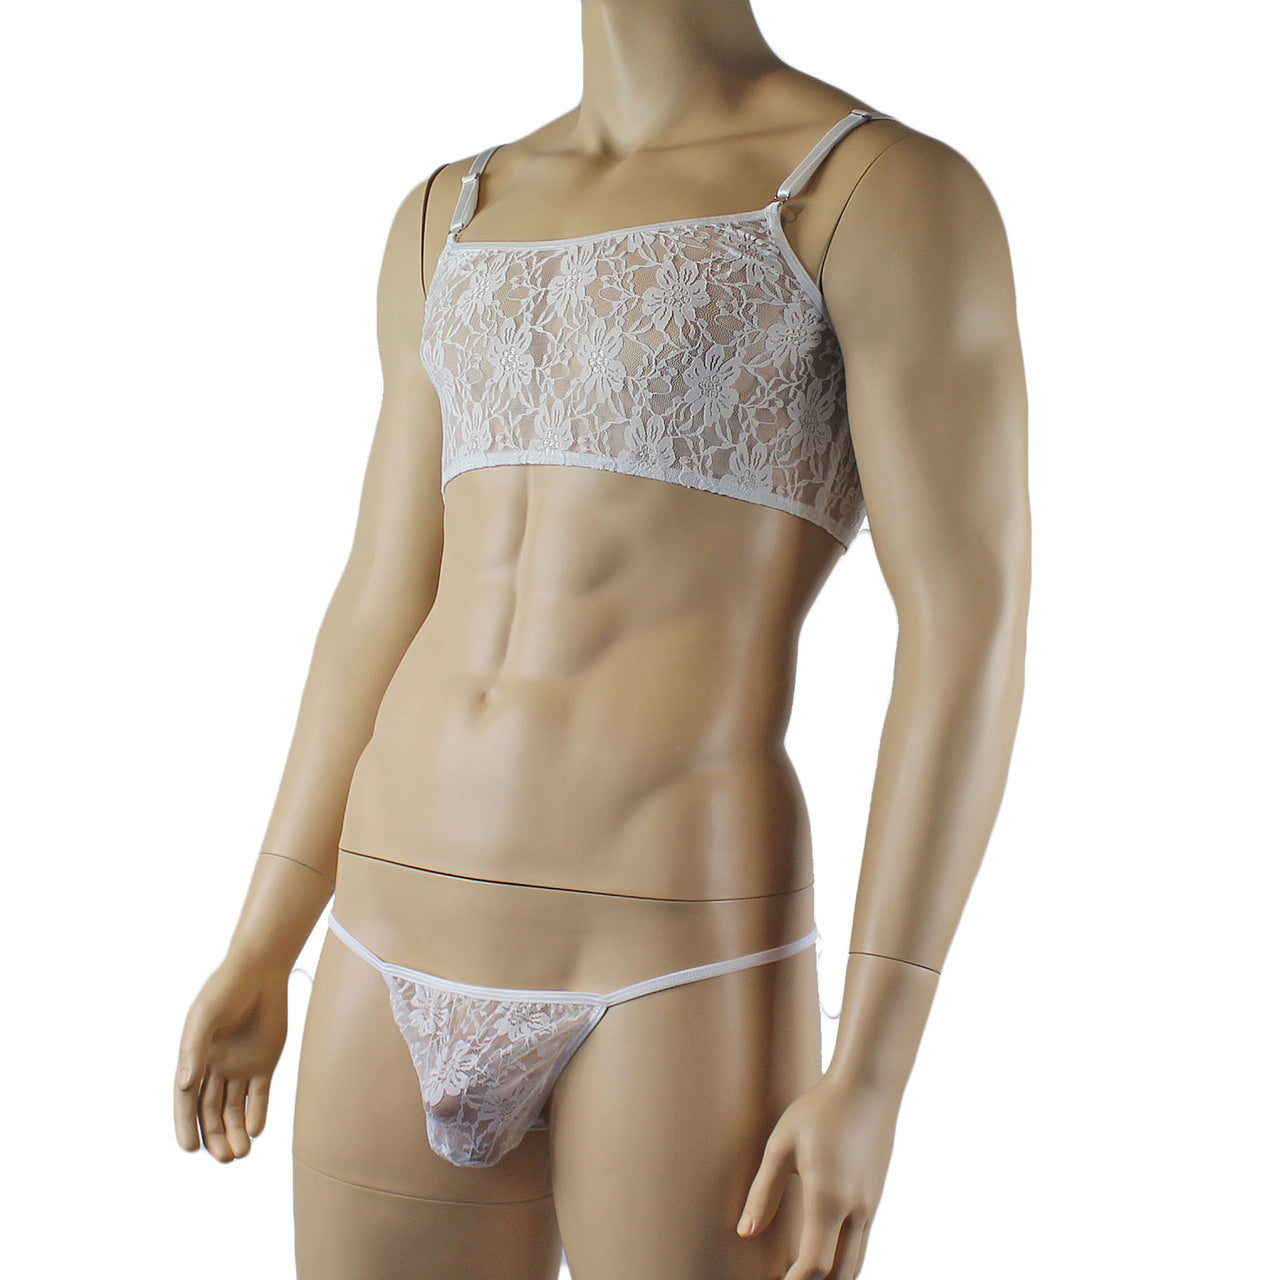 Mens Lace Crop Bra Top Camisole and Male Lingerie G string White